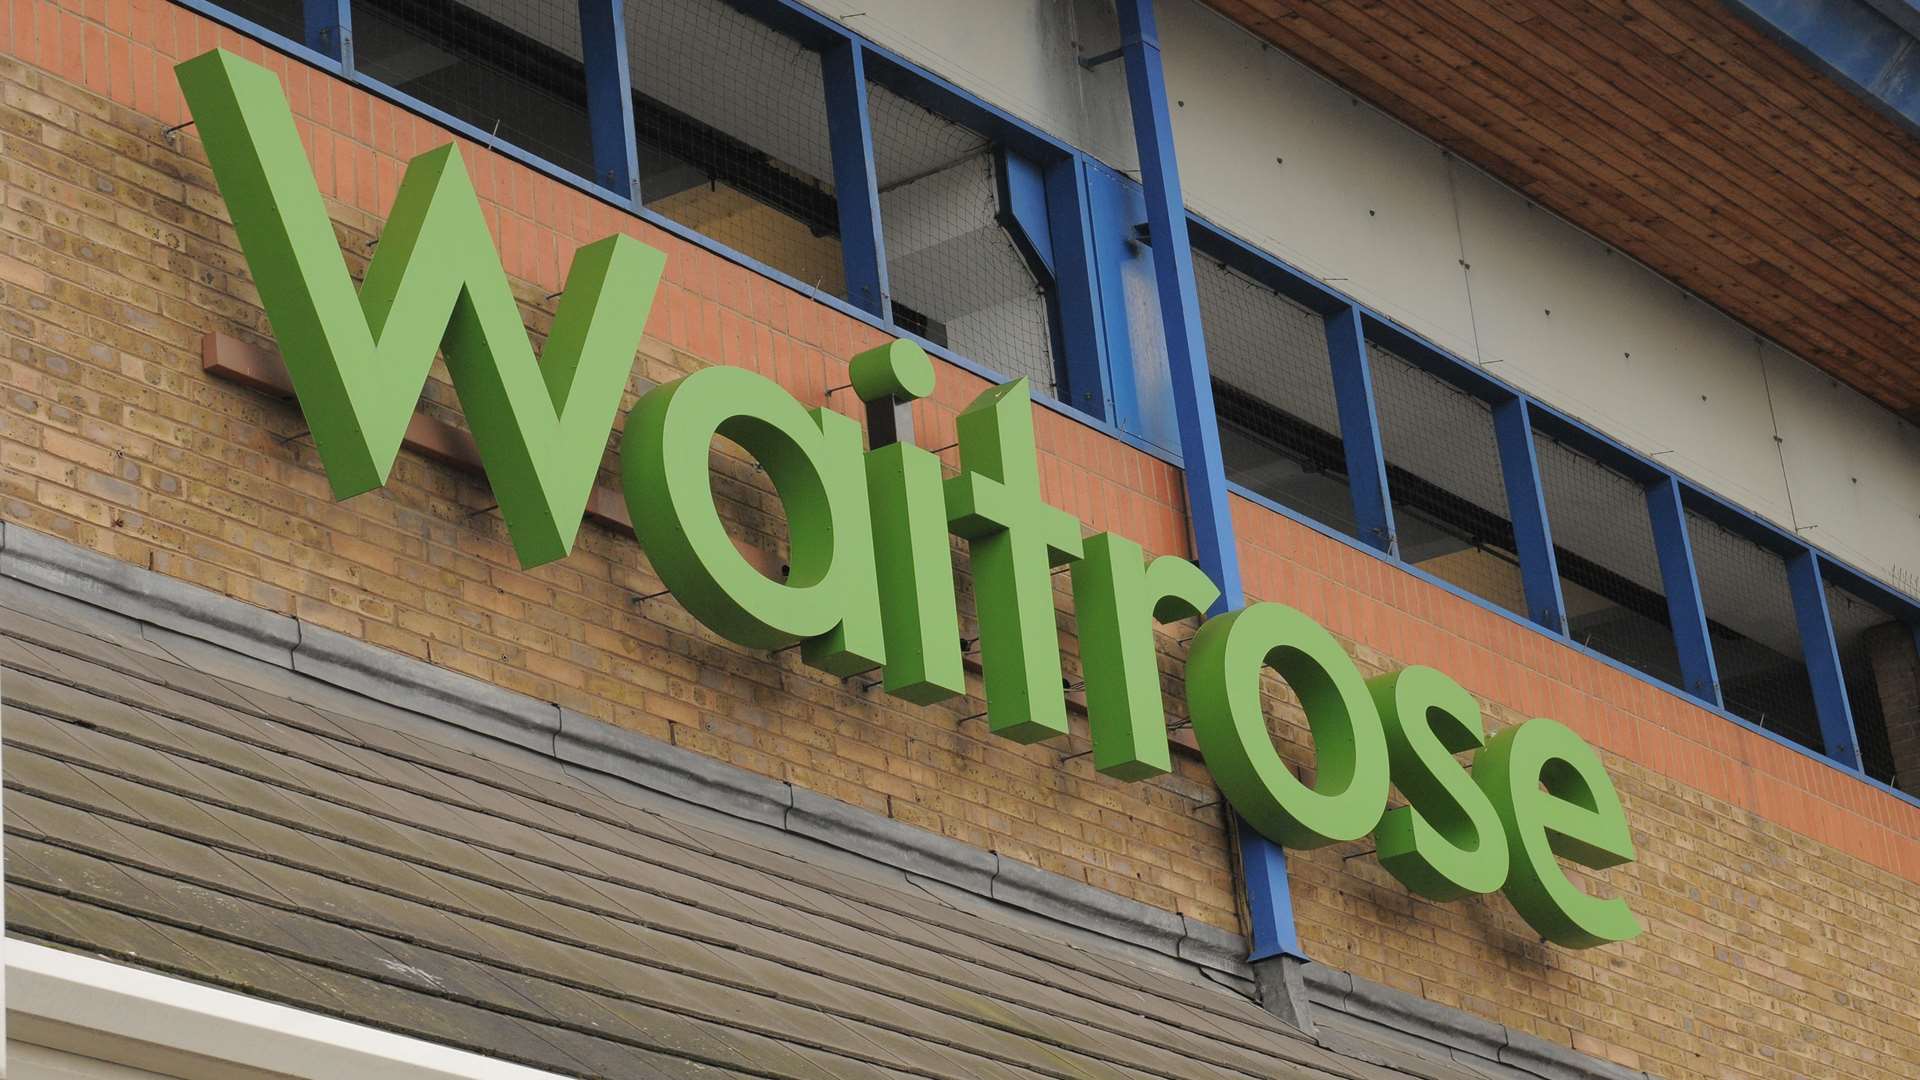 Waitrose car park will offer two hours free stay